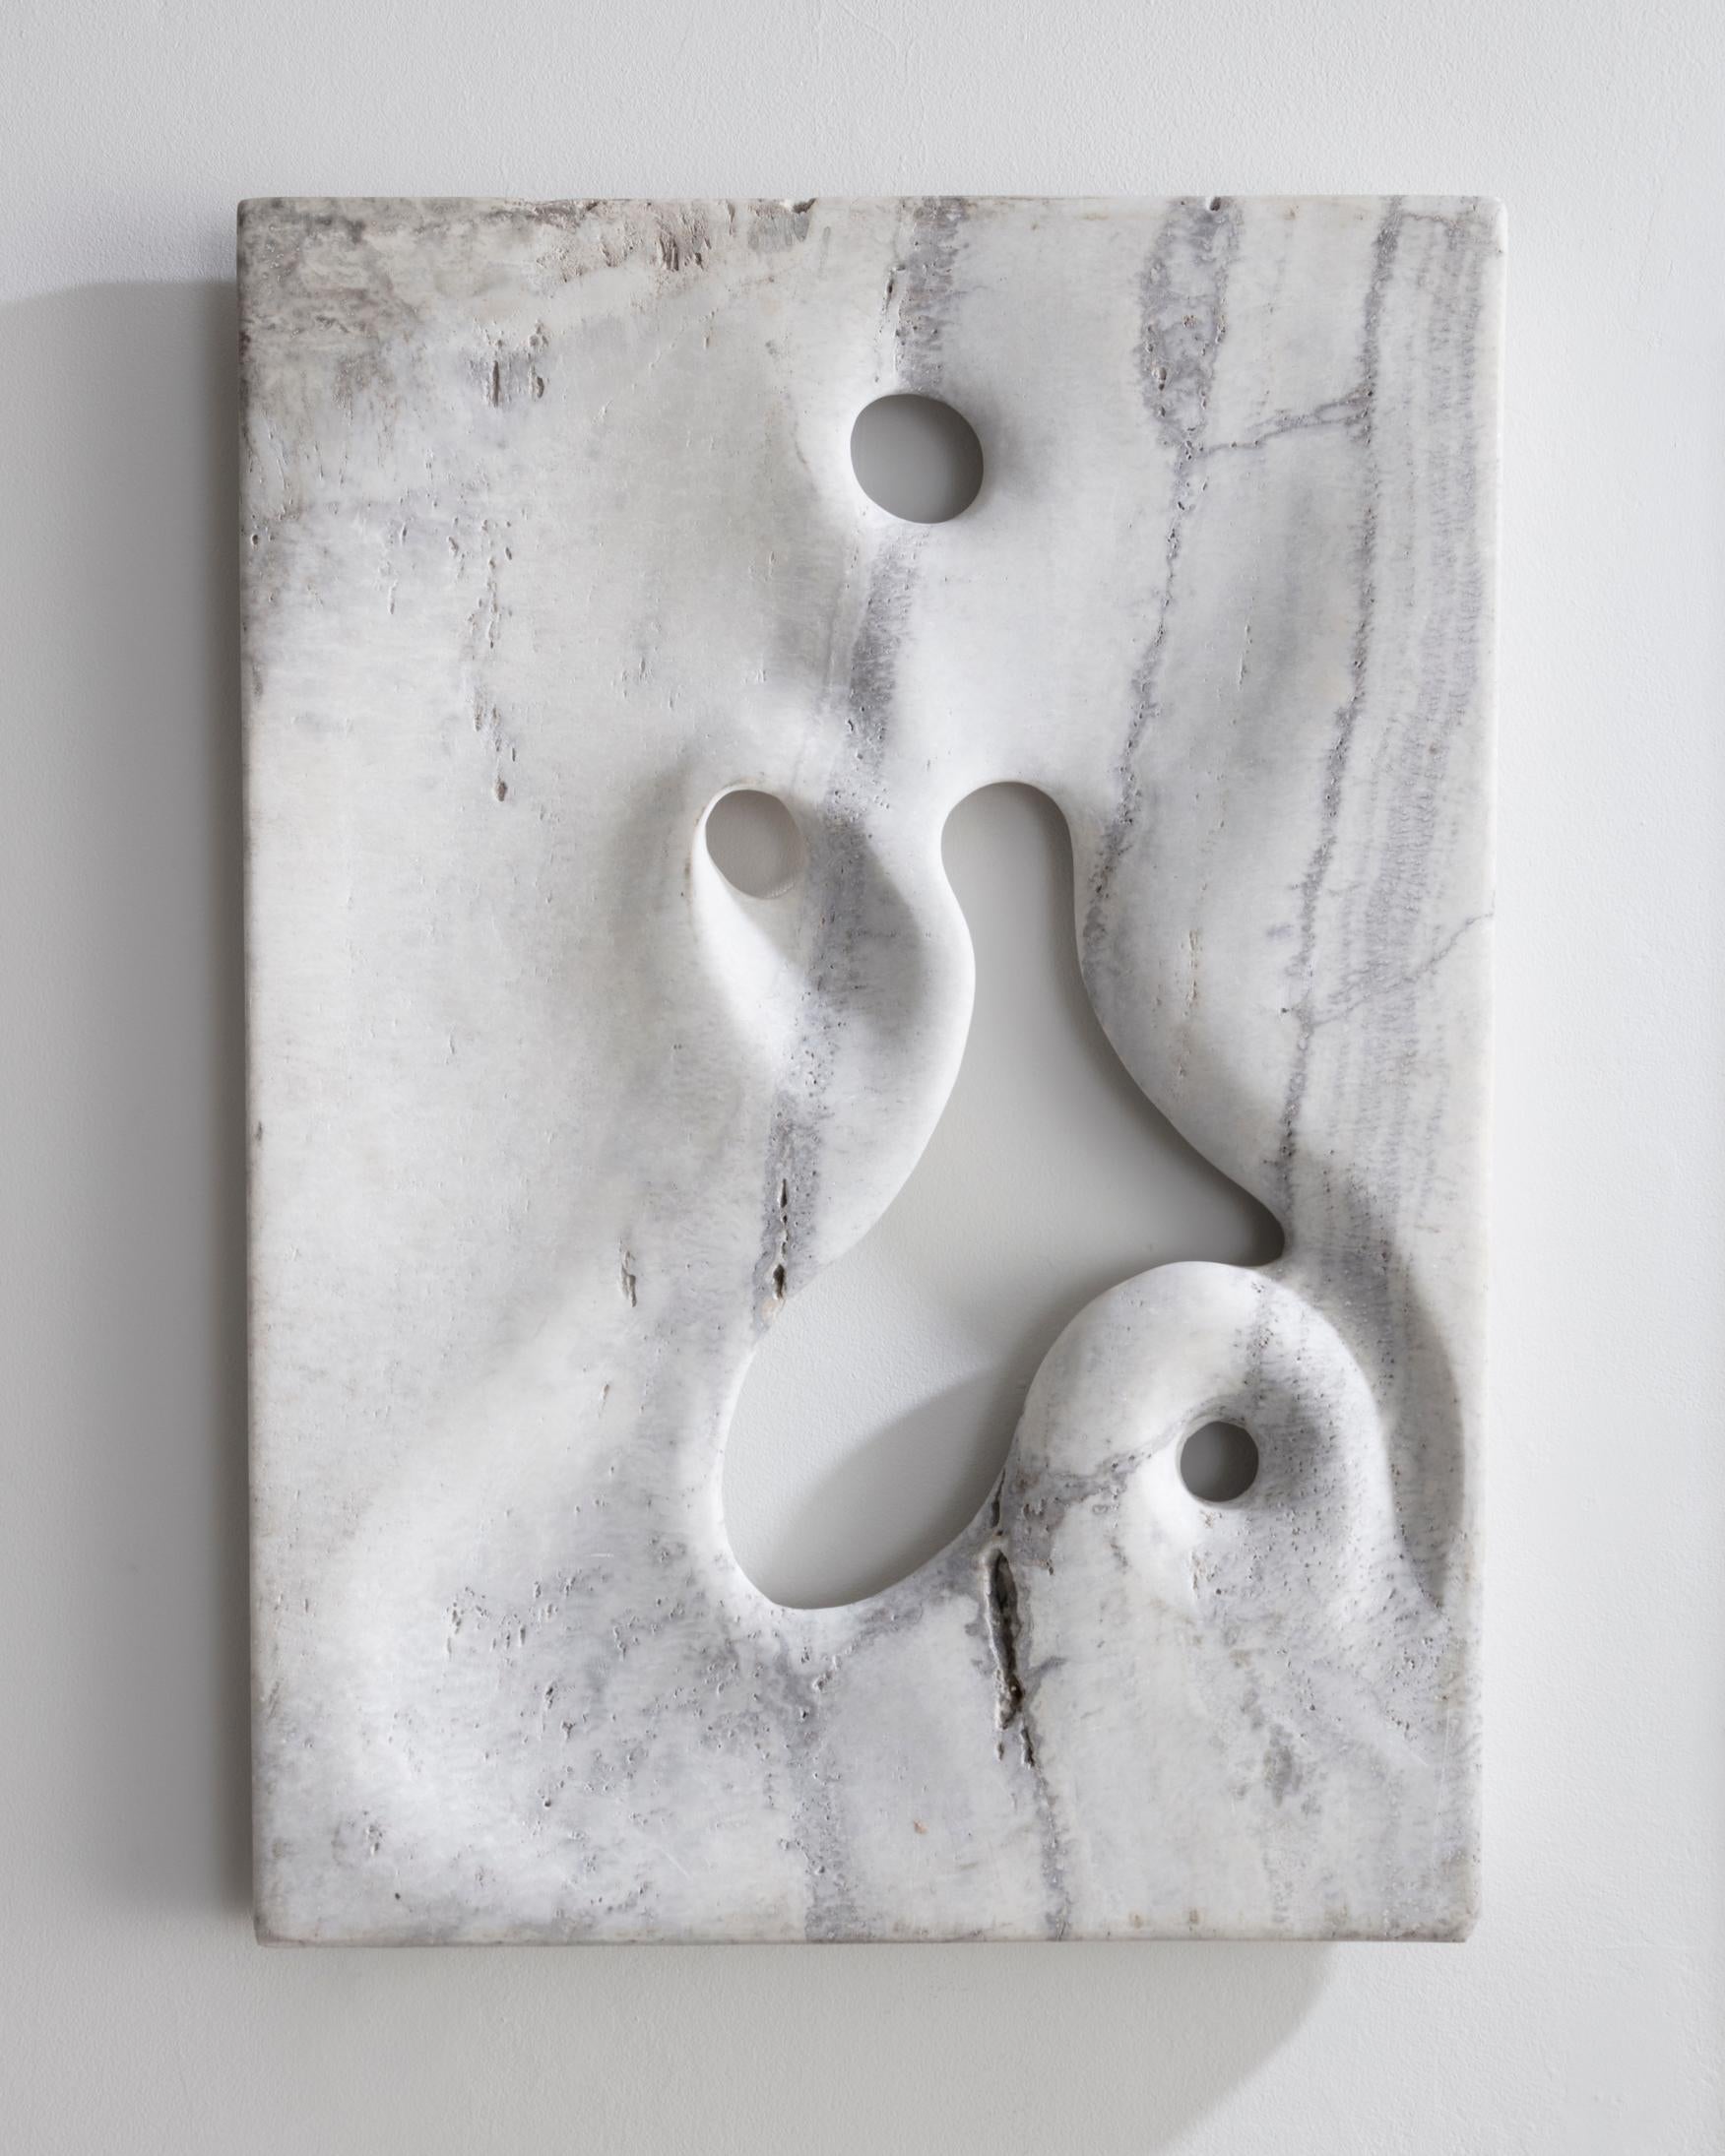 Modern Wall Mounted Illuminated Sculpture in White Travertine by Rogan Gregory, 2016